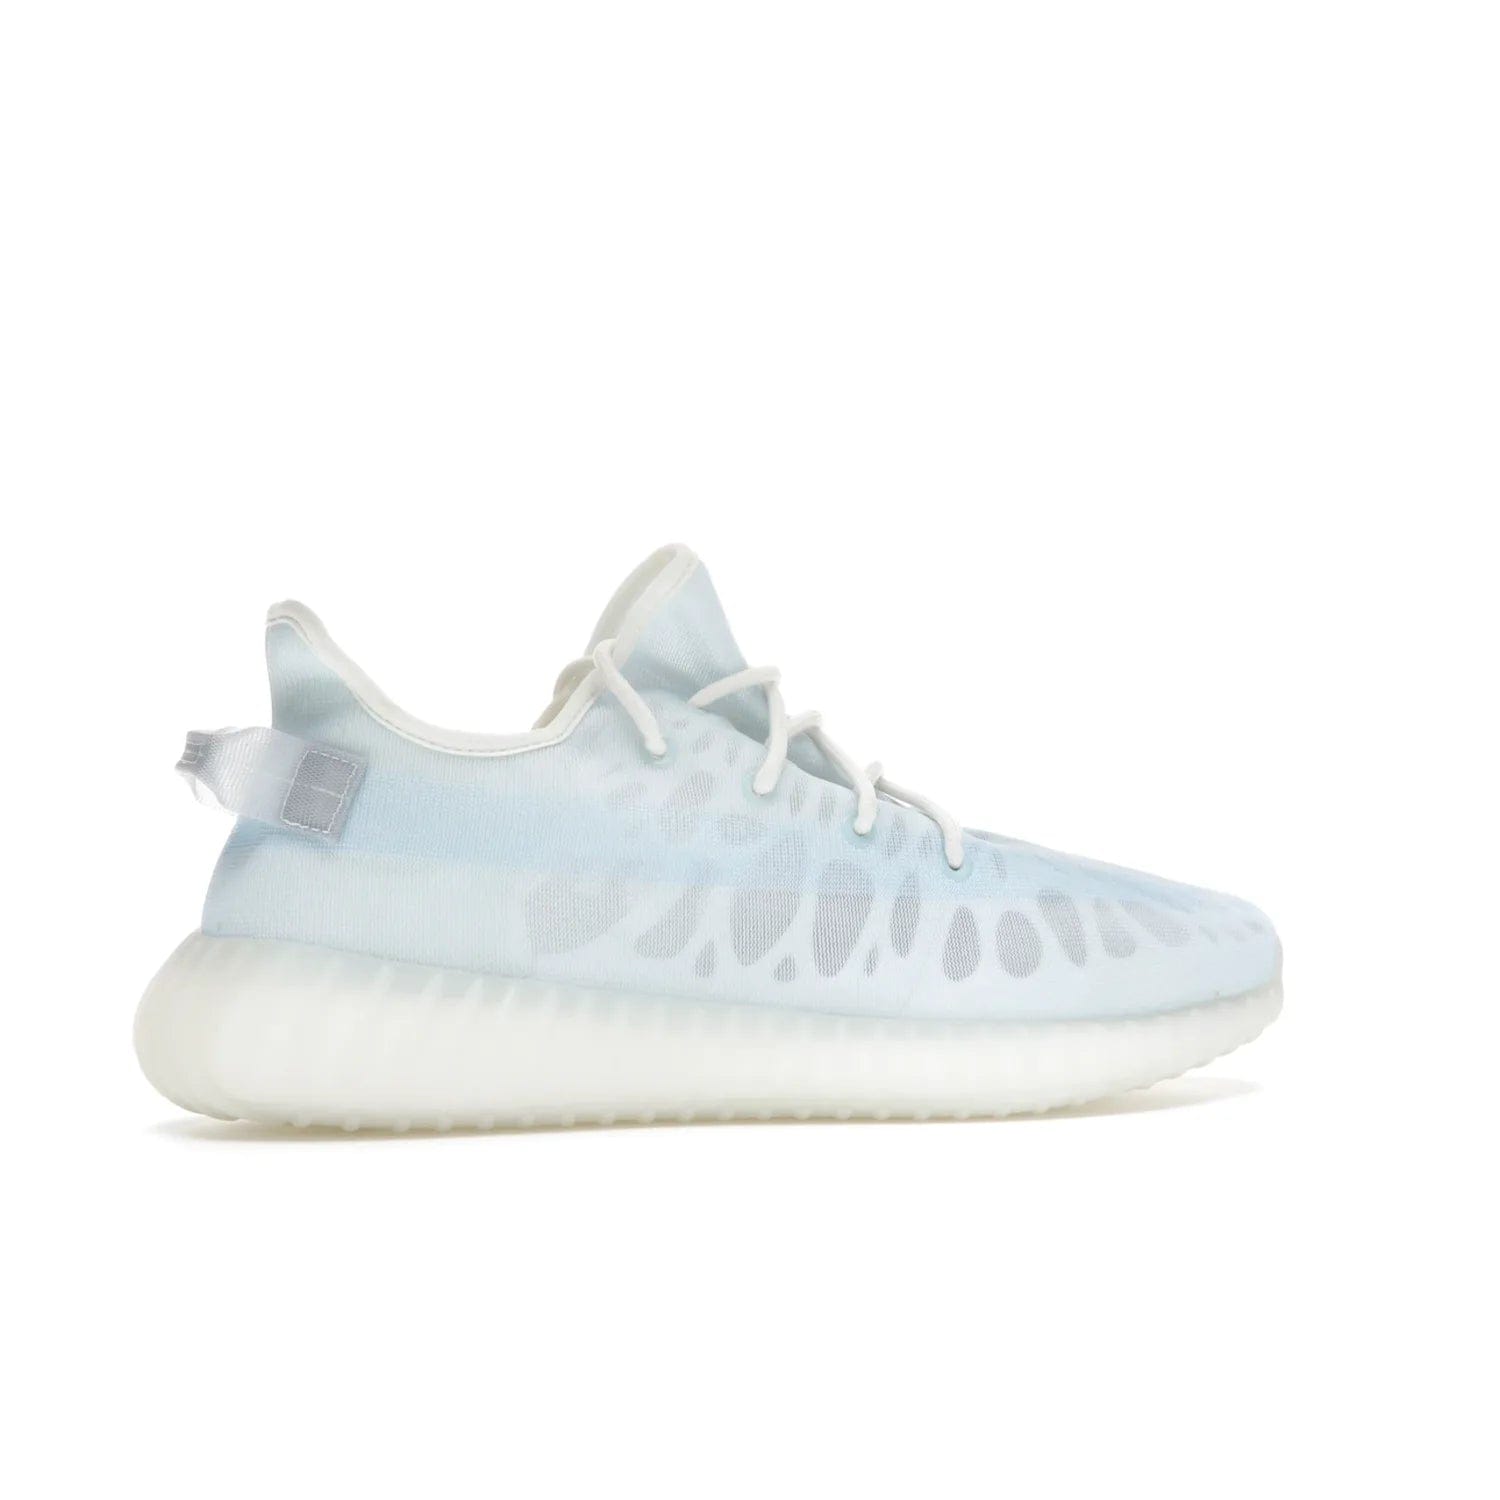 adidas Yeezy Boost 350 V2 Mono Ice - Image 35 - Only at www.BallersClubKickz.com - Introducing the adidas Yeezy 350 V2 Mono Ice - a sleek monofilament mesh design in Ice blue with Boost sole and heel pull tab. Released exclusively in the US for $220.